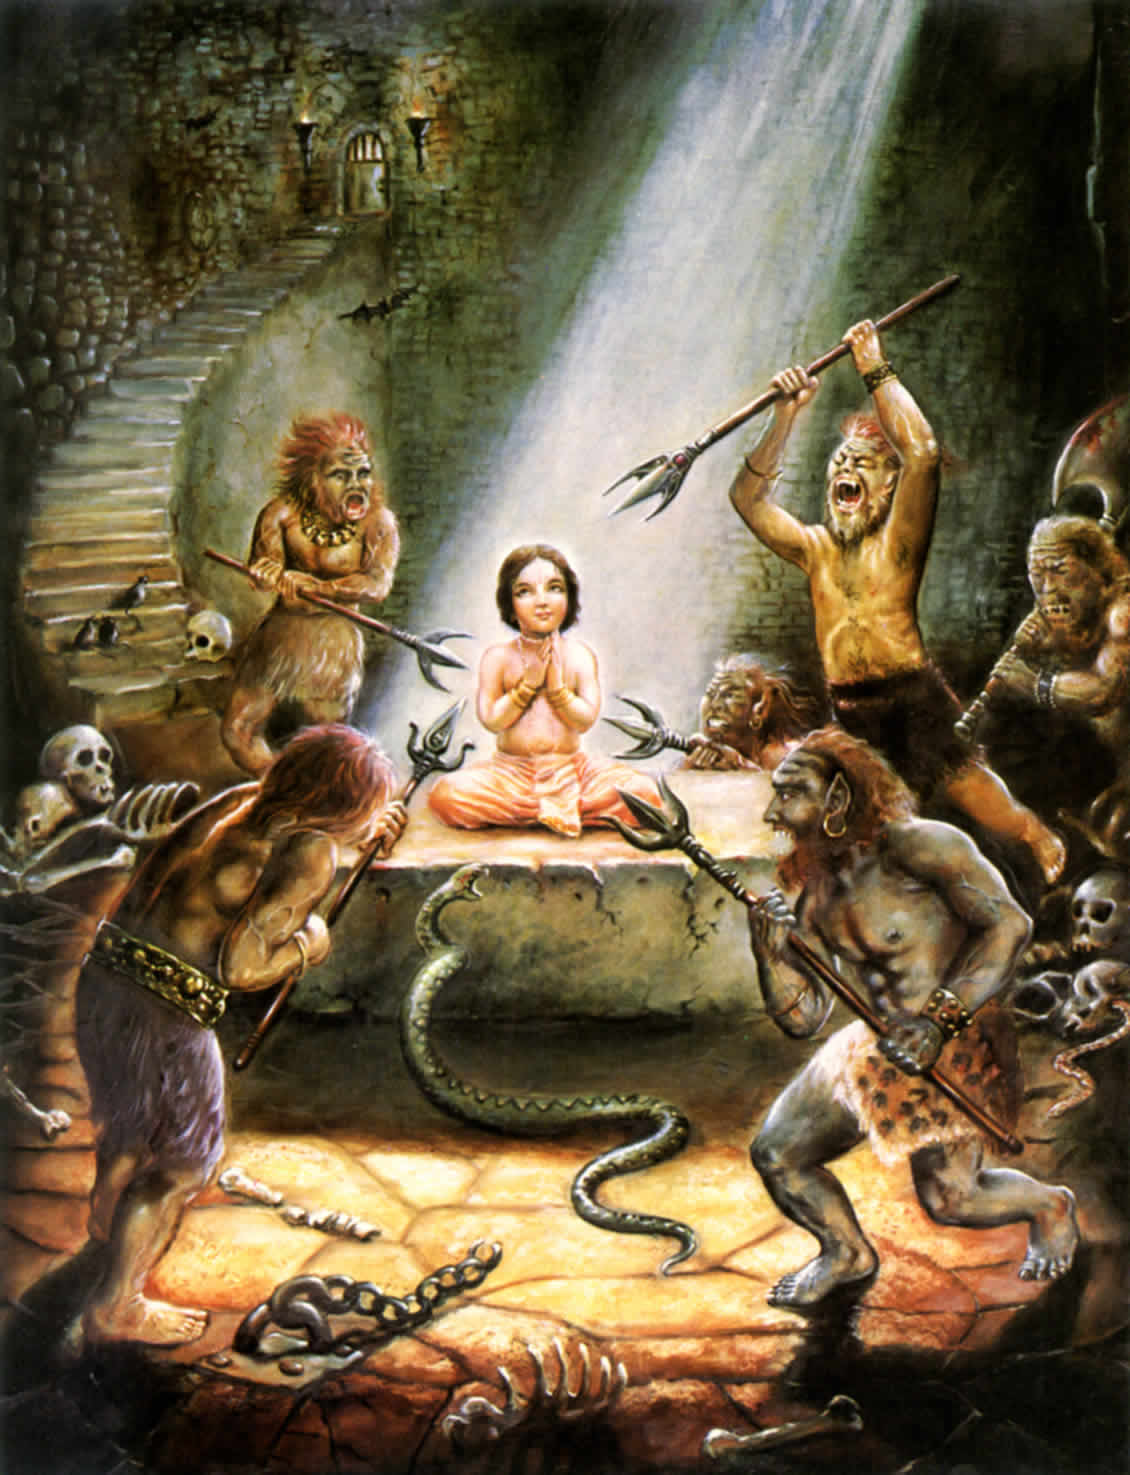 Prahlada tortured by his father's servants.